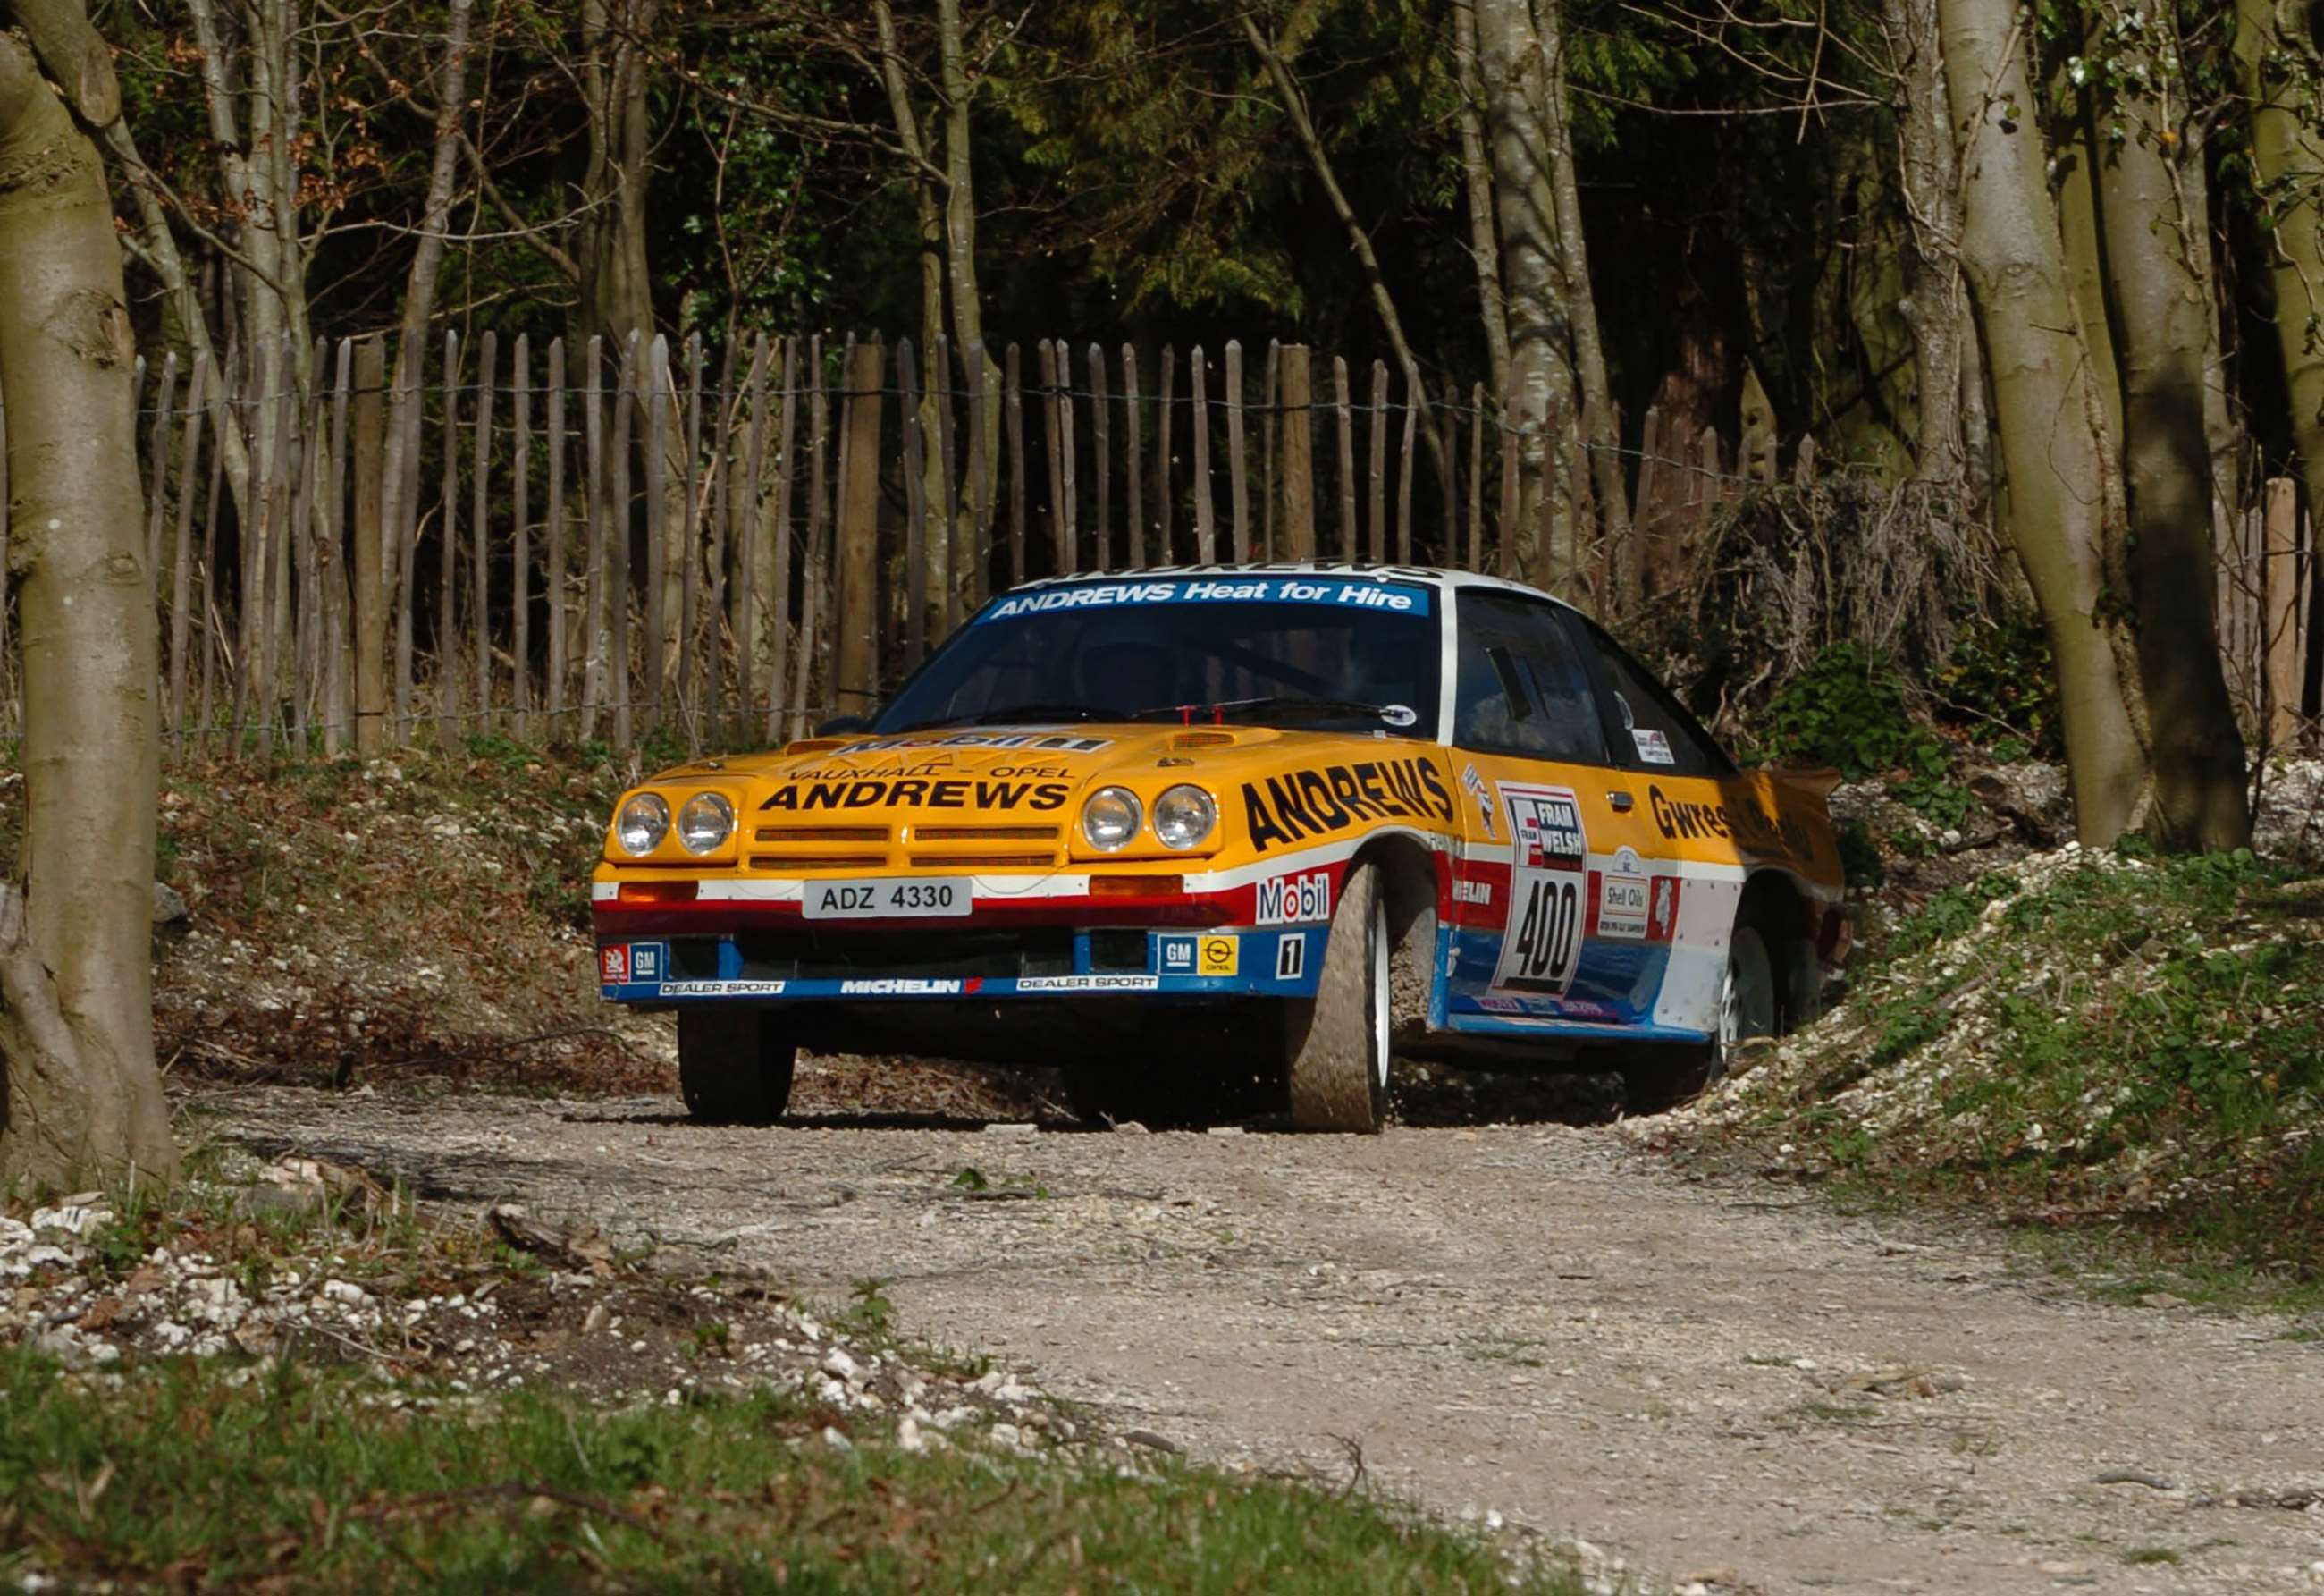 russell-brookes-goodwood-forest-rally-stage-opel-manta-400-jeff-bloxham-lat-motorsport-images-goodwood-31102019.jpg